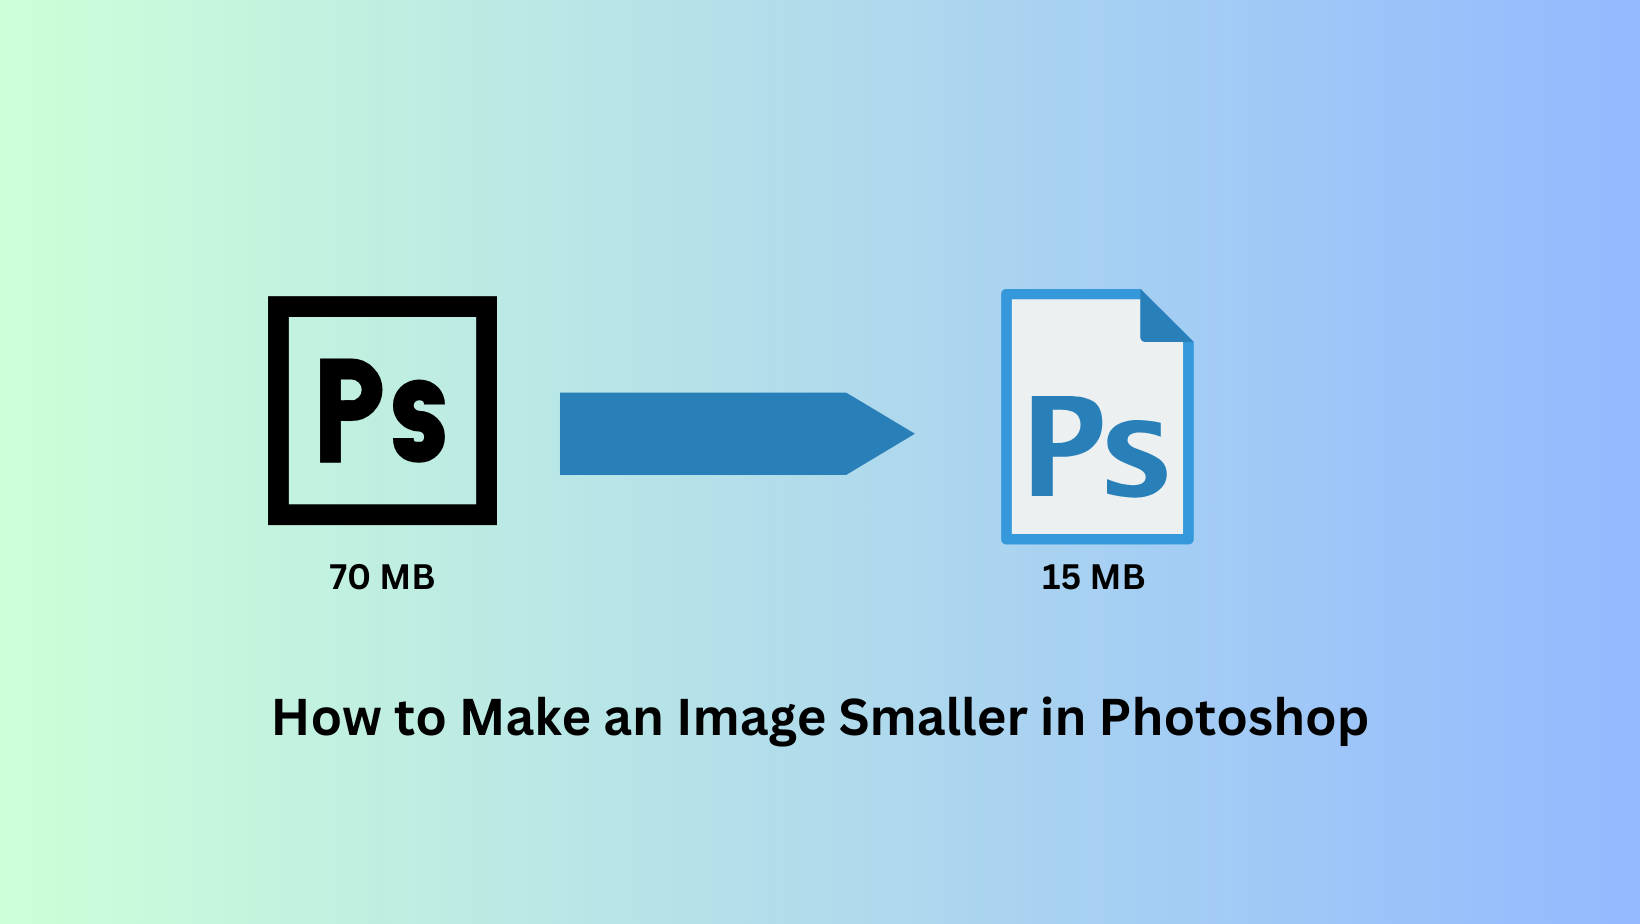 Image Smaller in Photoshop